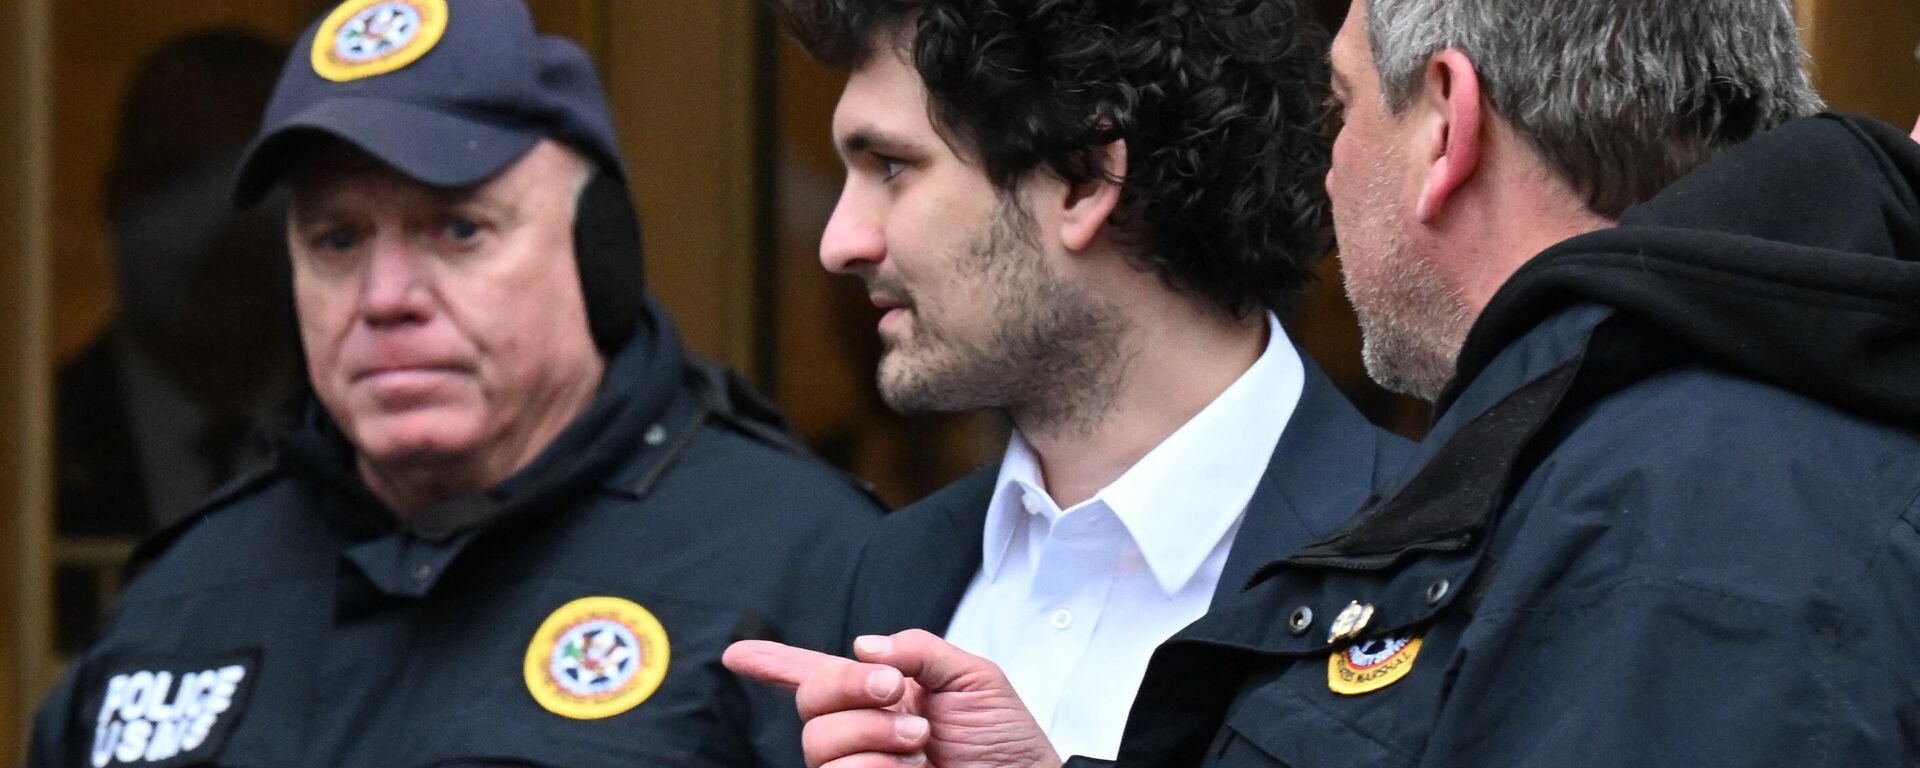 FTX founder Sam Bankman-Fried leaves court following his arraignment in New York City on December 22, 2022.  - Sputnik International, 1920, 23.12.2022